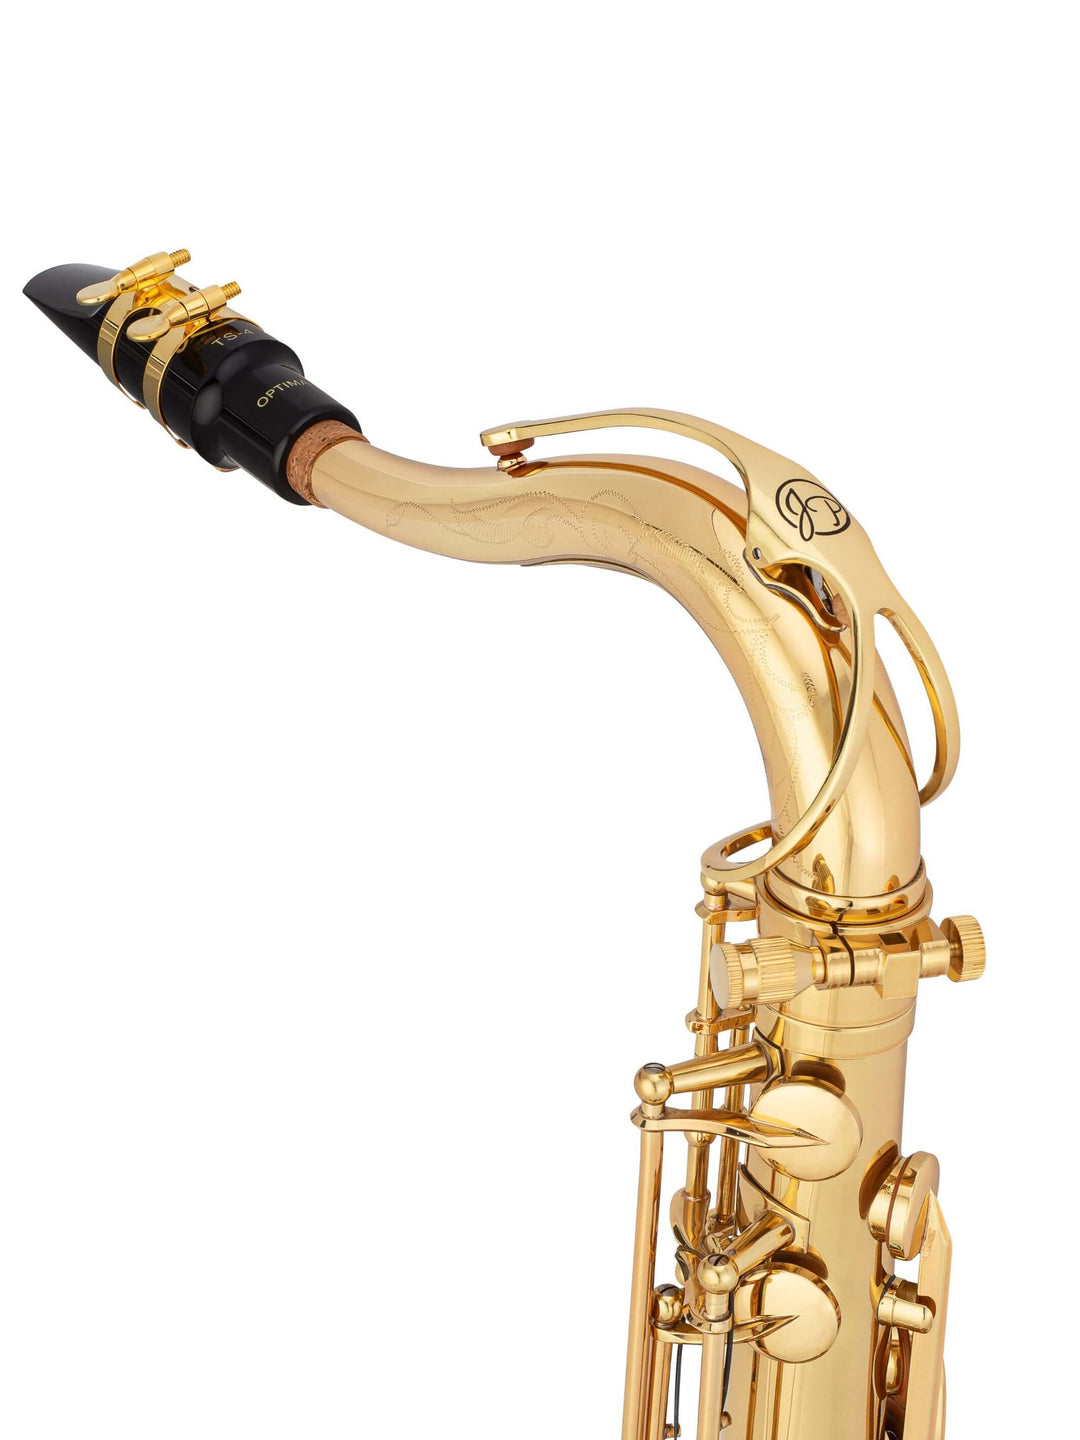 TS-860U Tenor Saxophone Unlacquered Neck and Mouthpiece#finish_unlacquered